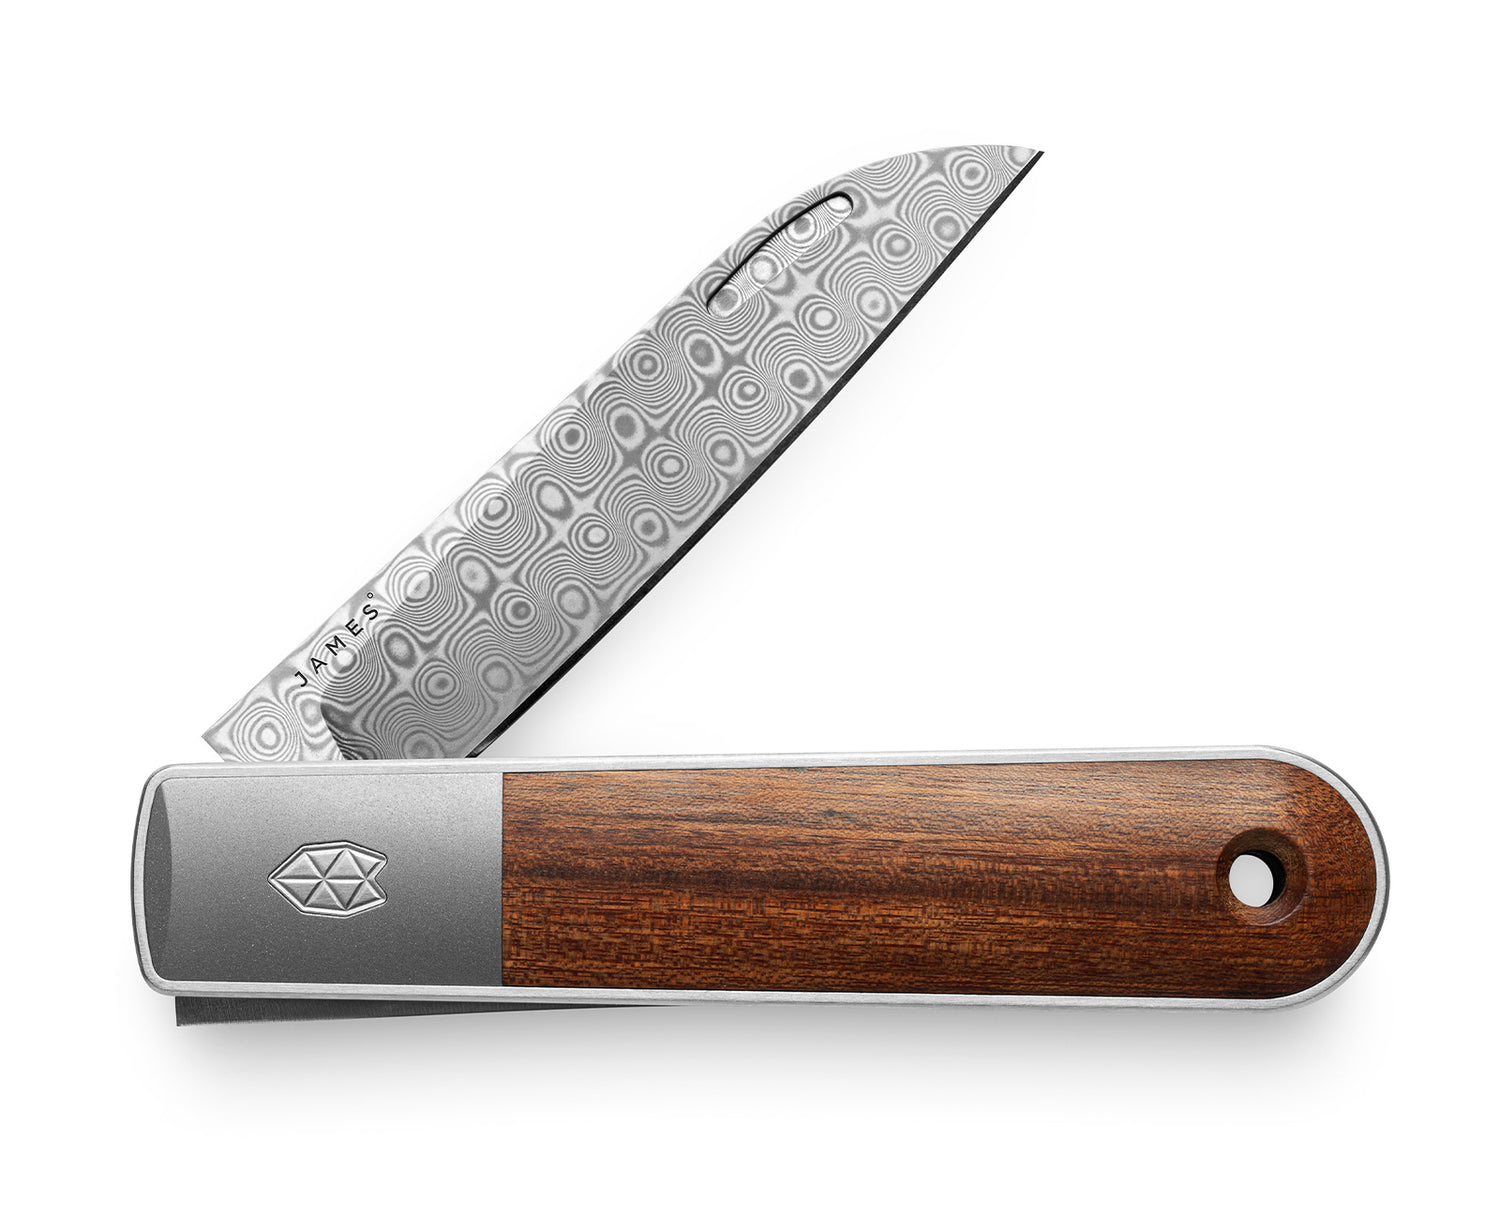 The Wayland knife with rosewood handle and damasteel blade.